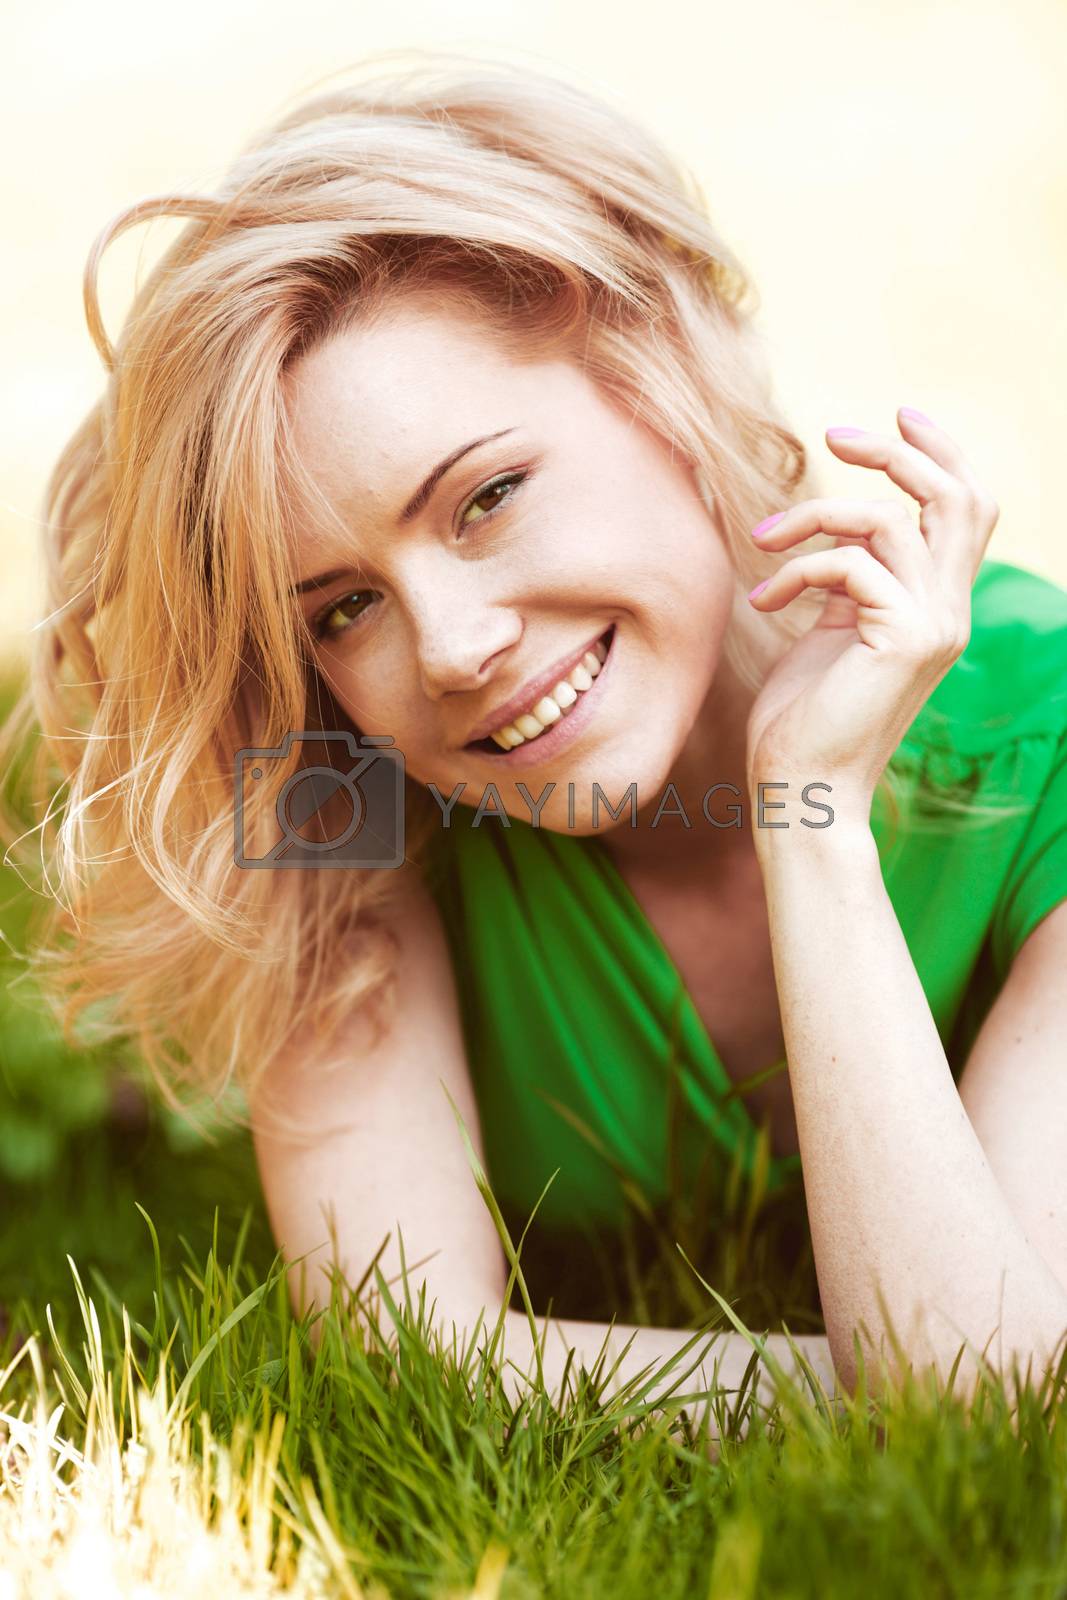 Royalty free image of Young woman on grass by Yellowj